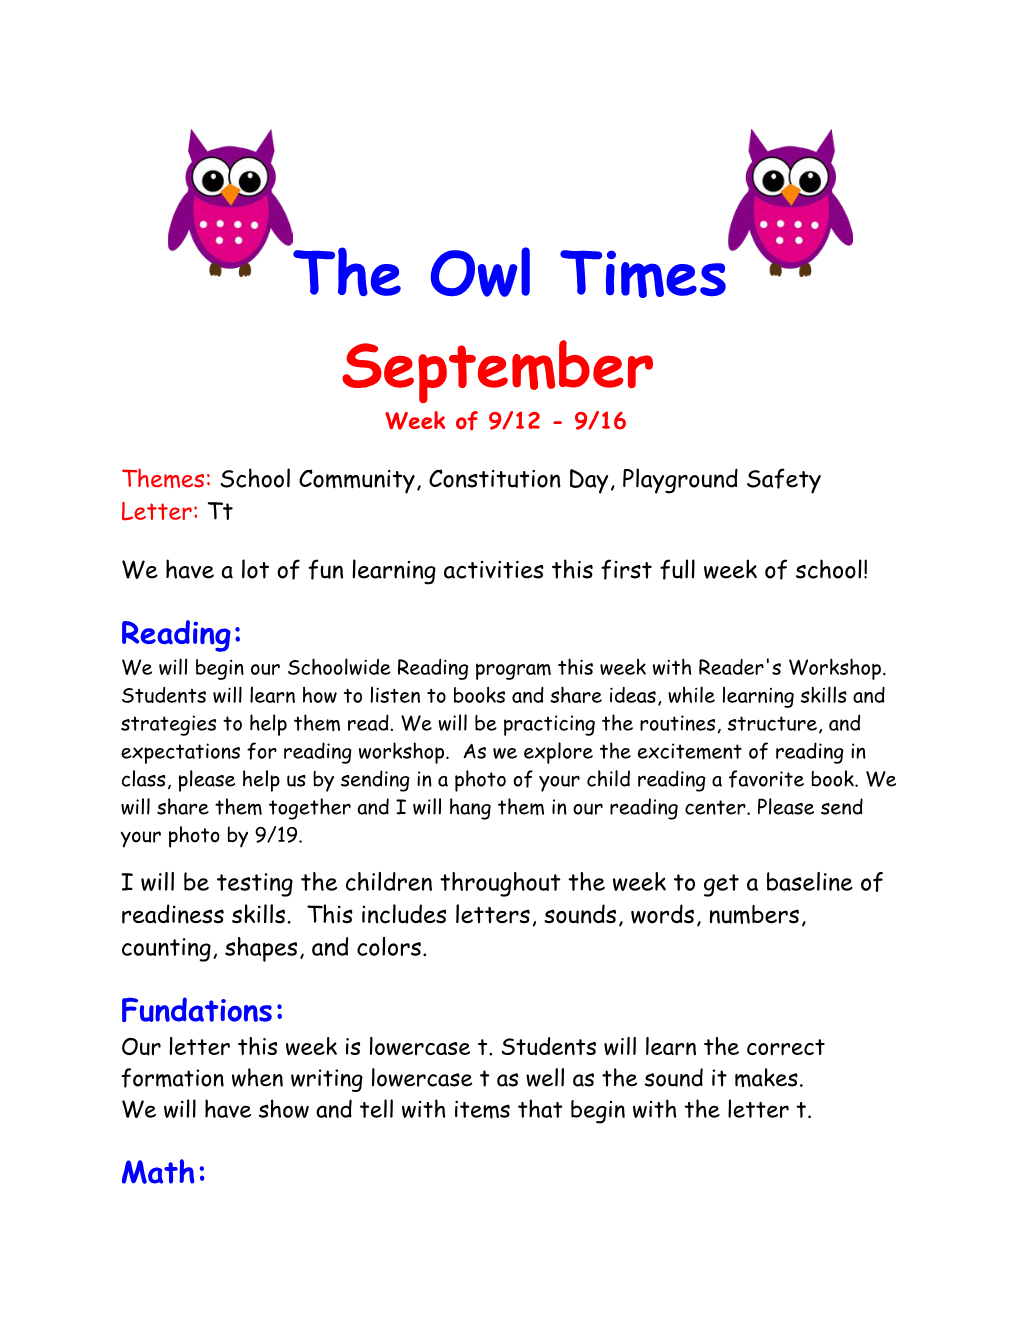 Themes: School Community, Constitution Day, Playground Safety